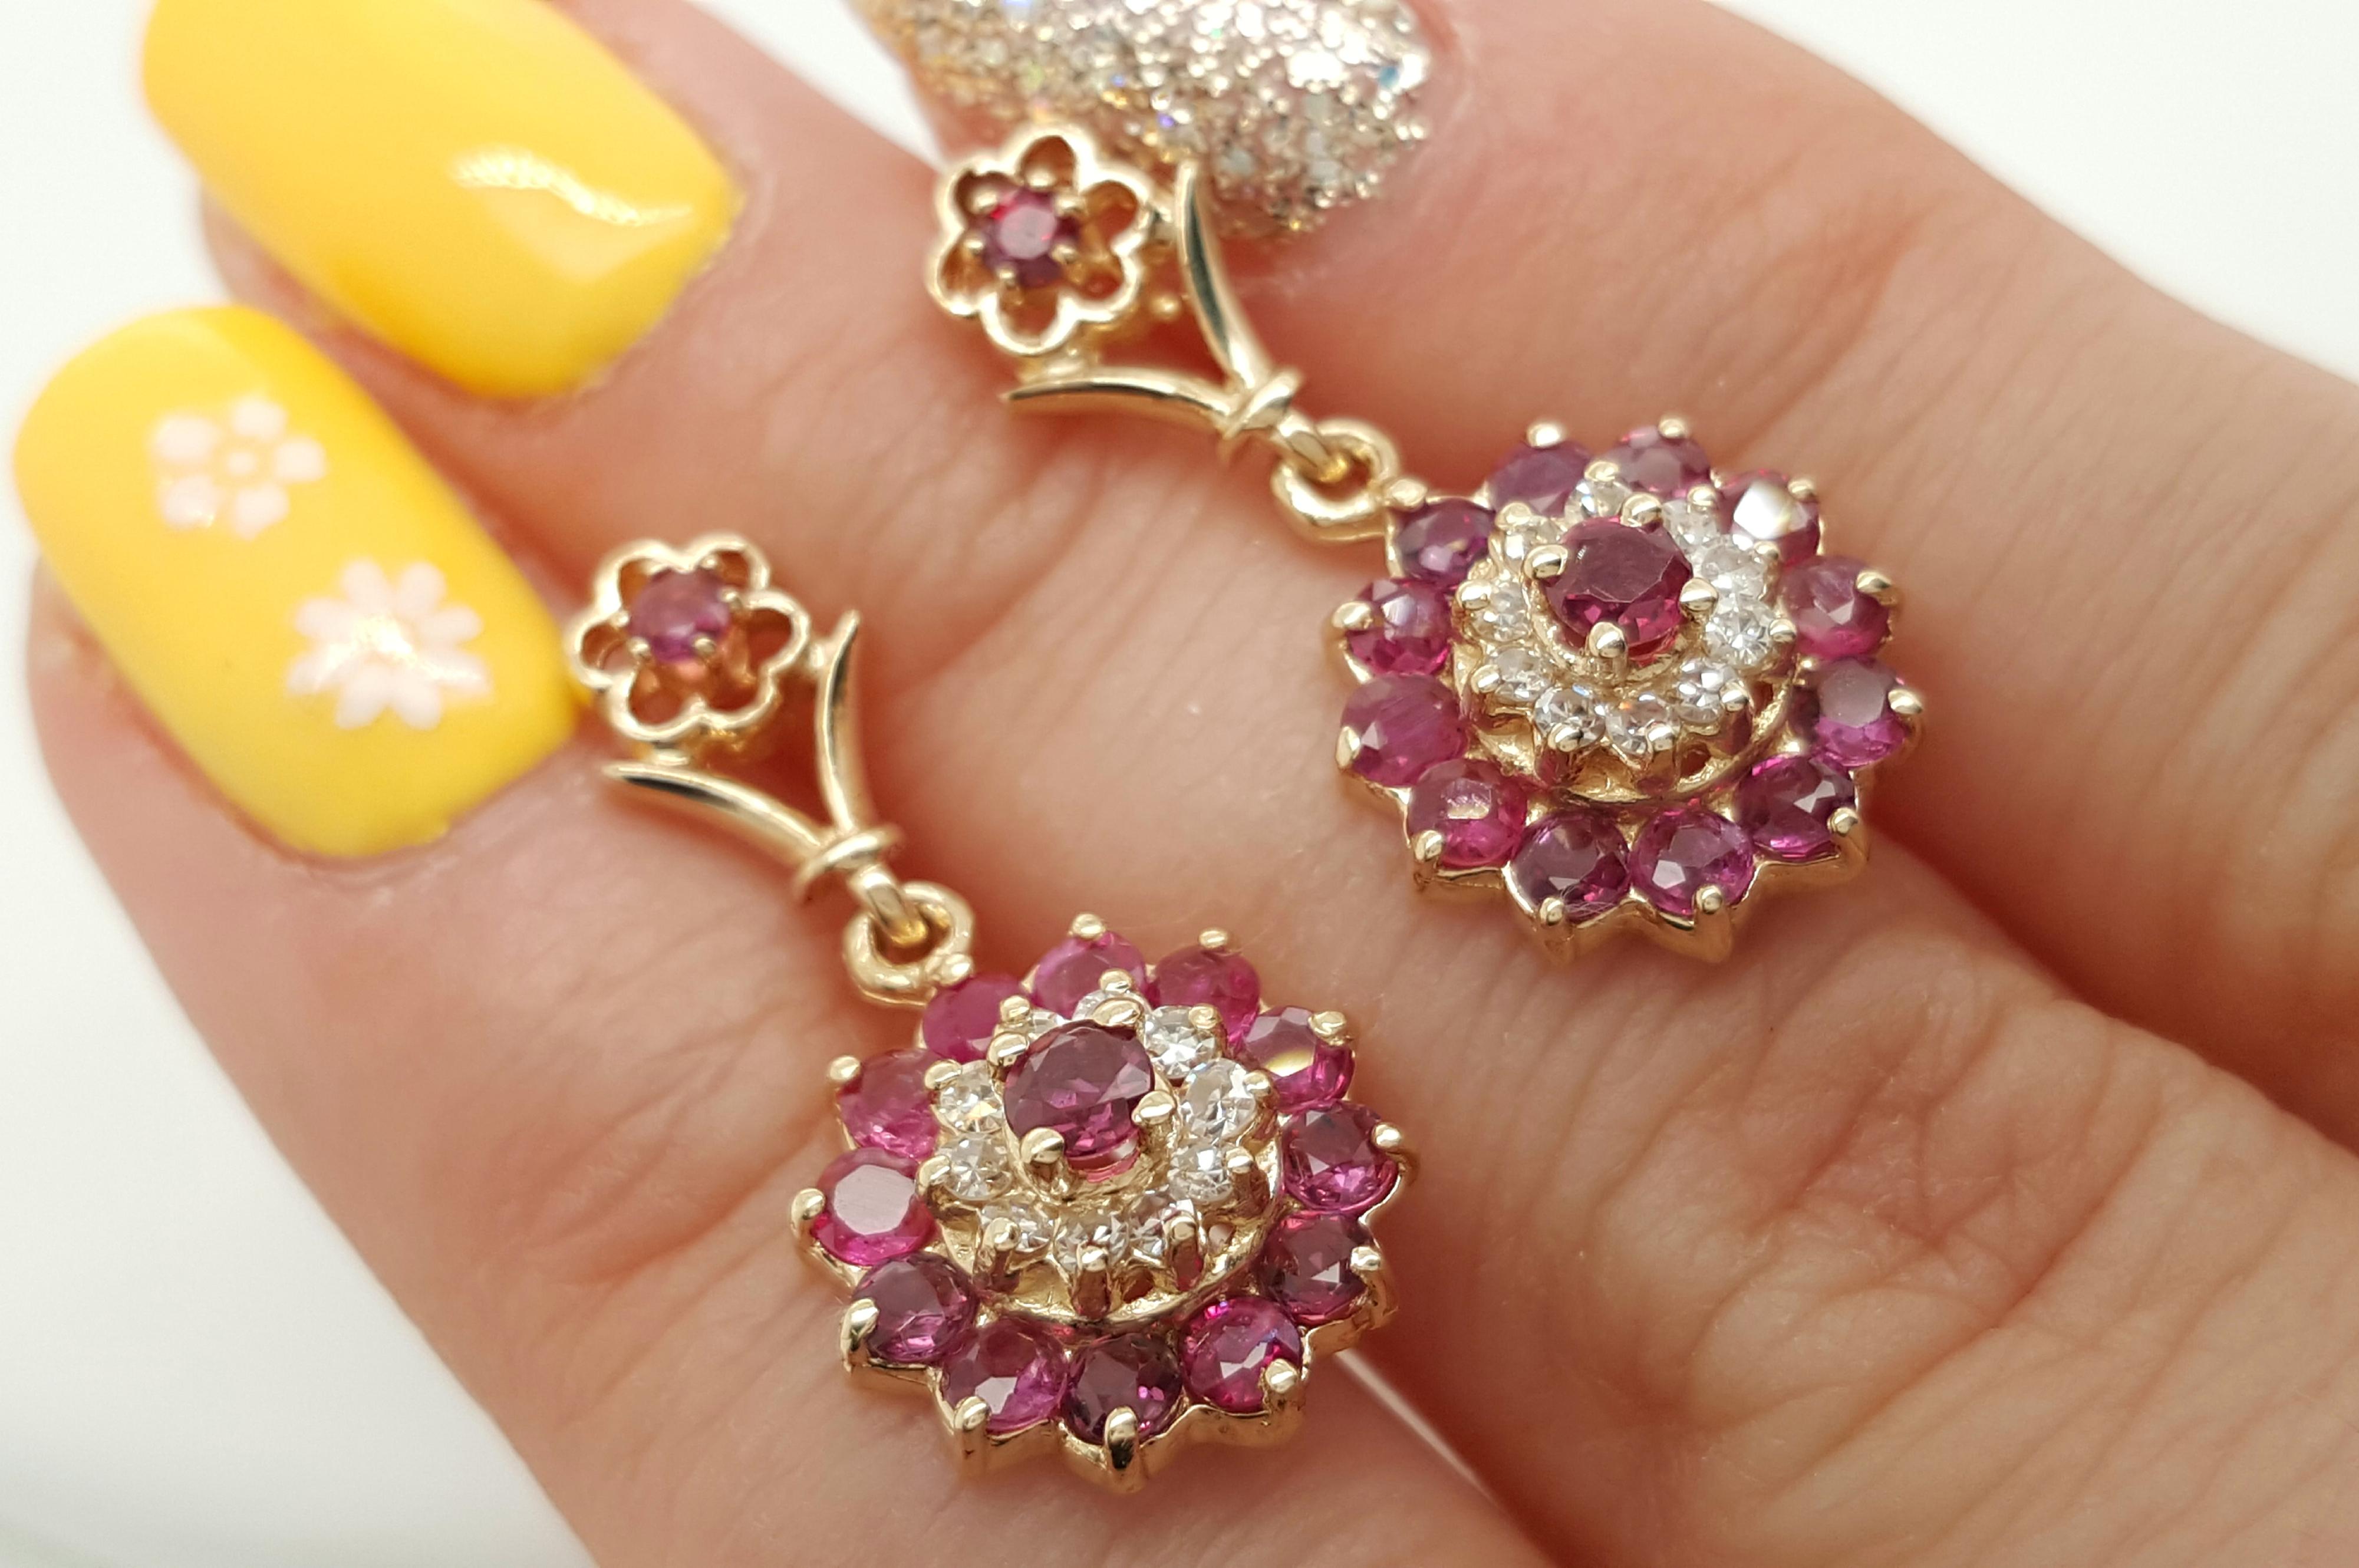 14 Karat Yellow Gold Vintage Style Diamond and Ruby Double Halo Earrings. Theses vintage inspired earrings feature round rubies and full cut diamonds in a classic double halo suspended from a tapered post with a feminine flower motif.  Completed by